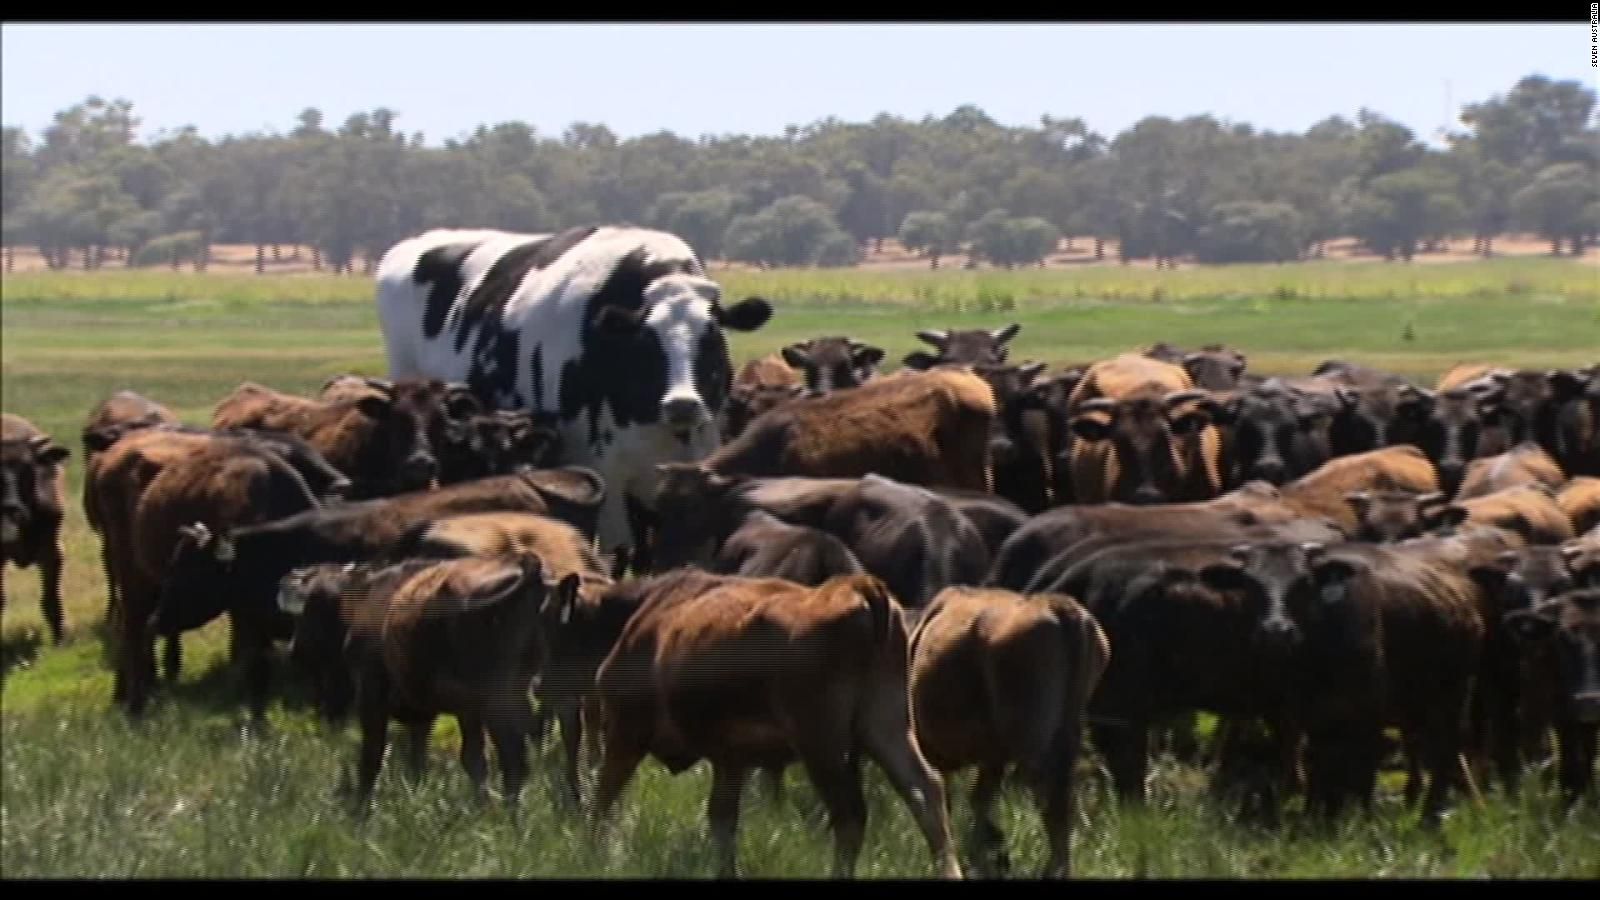 Knickers, a giant steer, makes headlines around the world